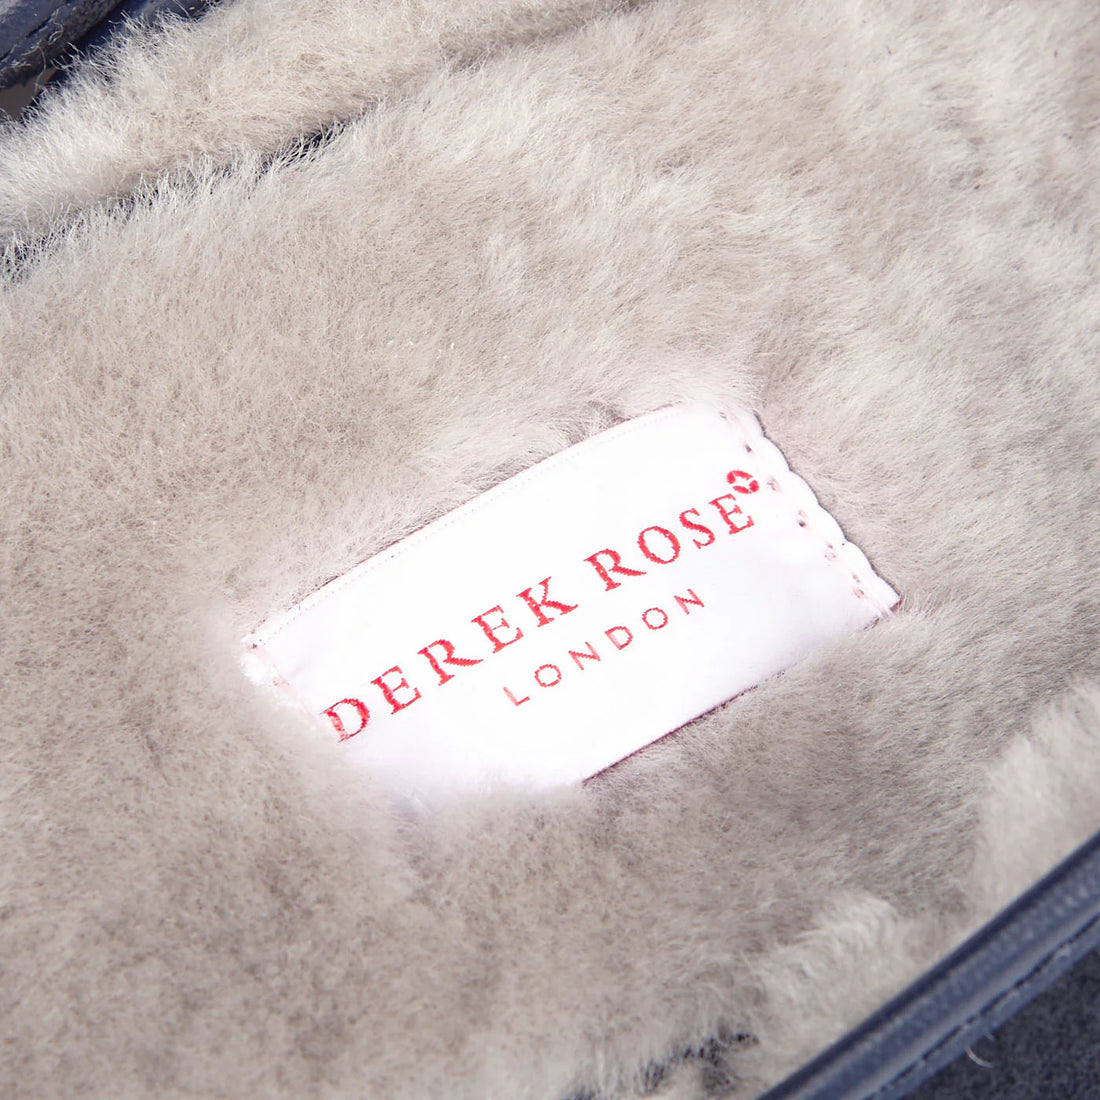 Close-up of a "derek rose london" label on a garment with a soft, fur-like lining.